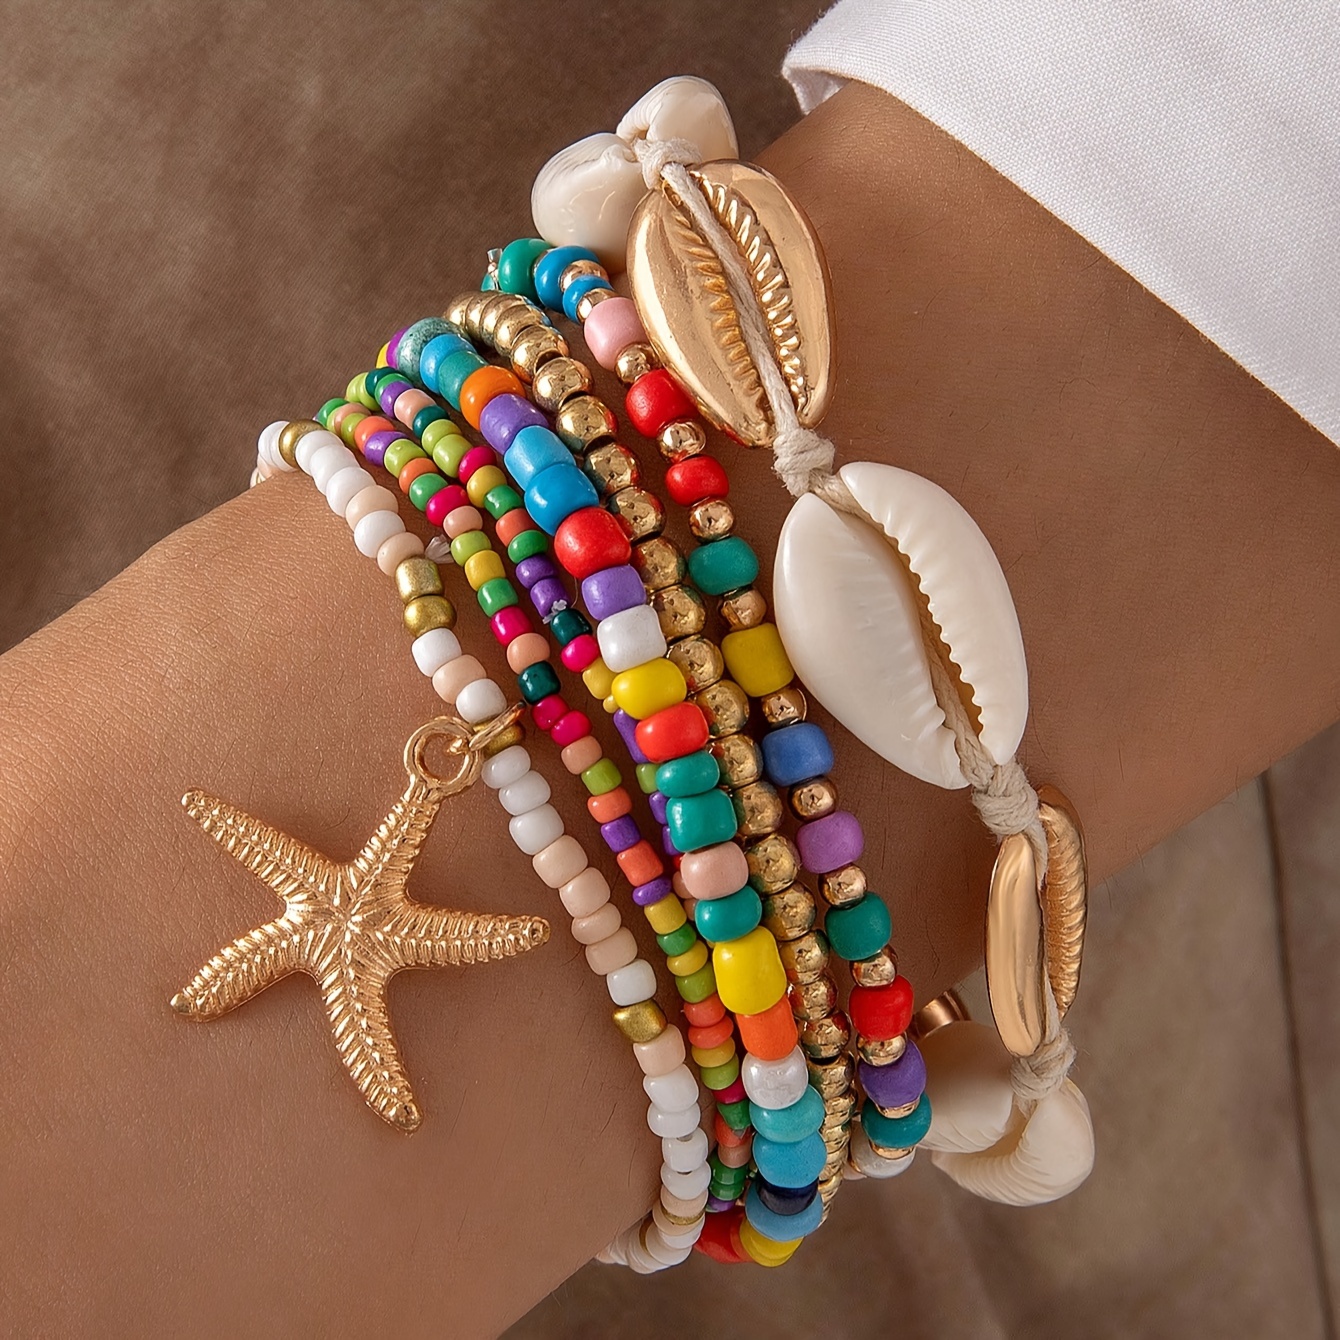 

7pcs Boho Style Starfish Pendant Beaded Bracelet Set With Mini Colorful Seed Beads Stackable Hand String